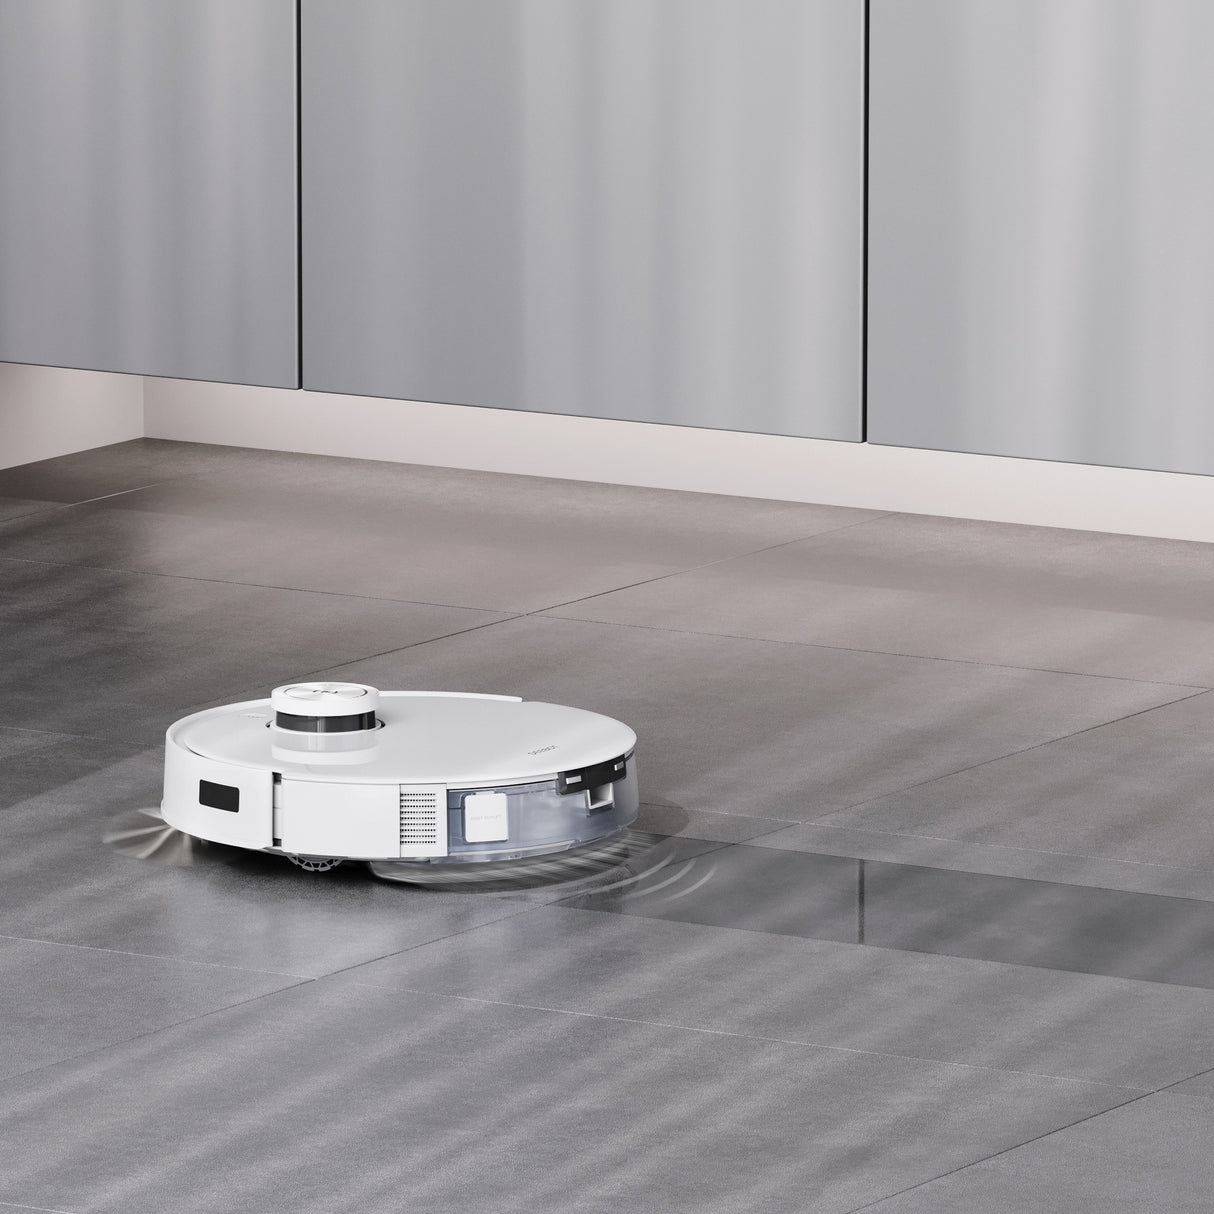 DEEBOT T10 PLUS Robot Vacuum Cleaner - 3000Pa, 260min Runtime